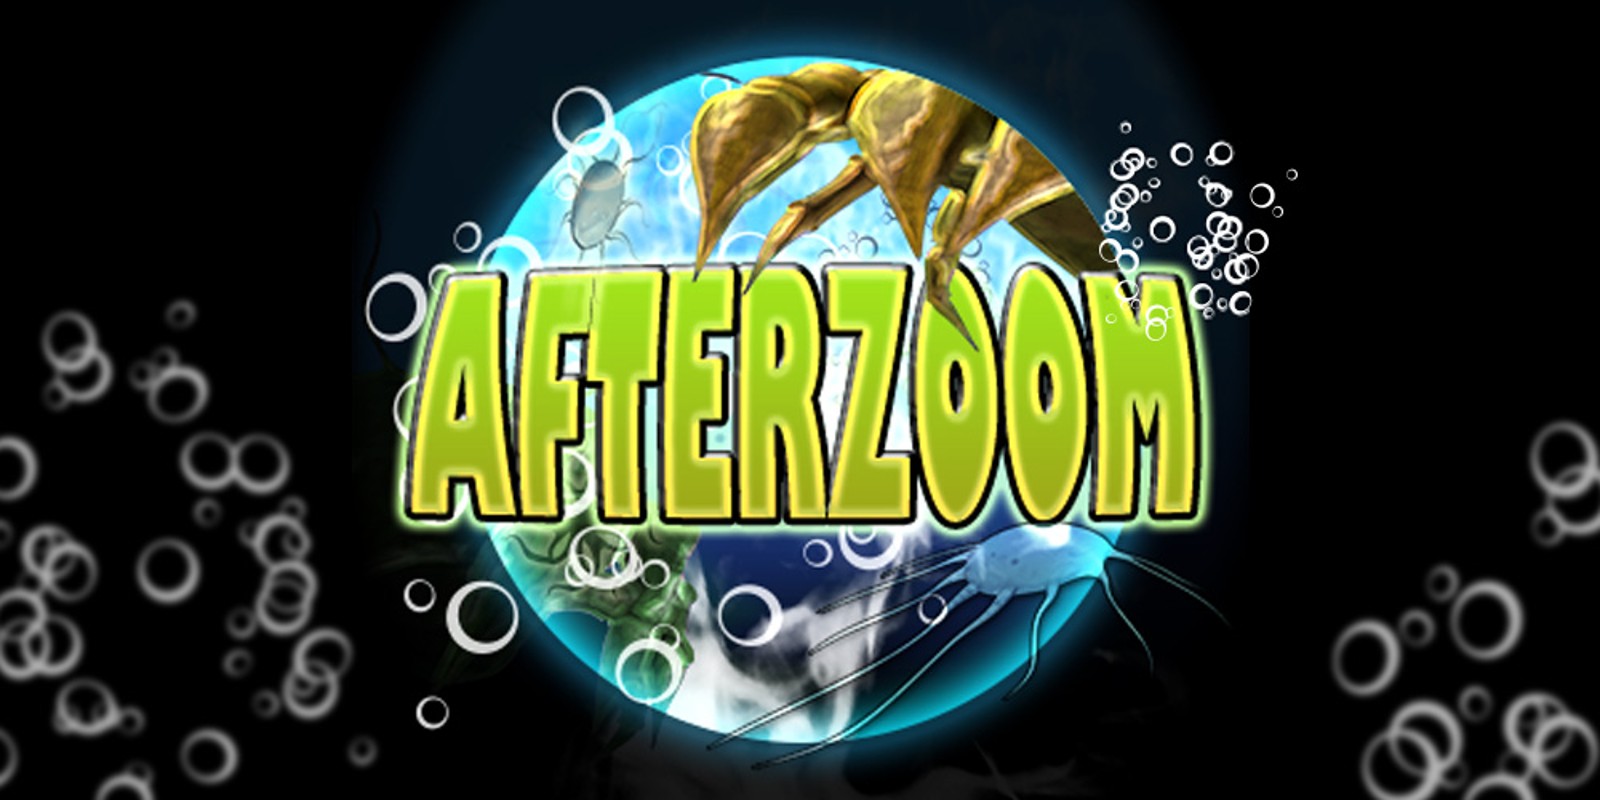 AfterZoom